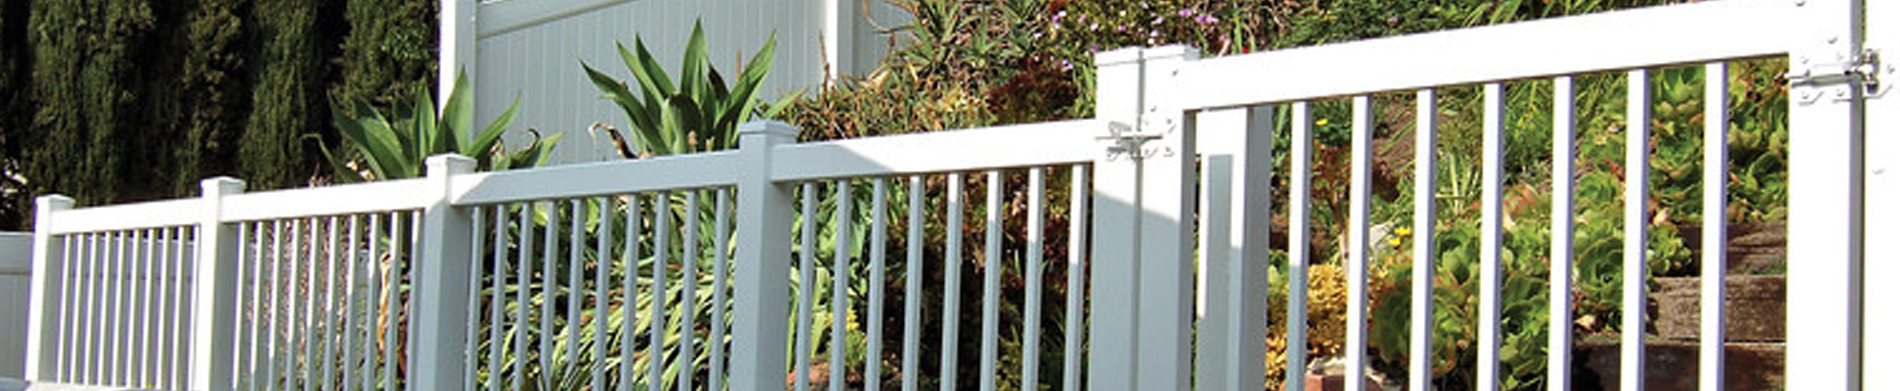 Installing vinyl privacy or semi-privacy fence from Duramax – Enjoy seclusion as per your requirement